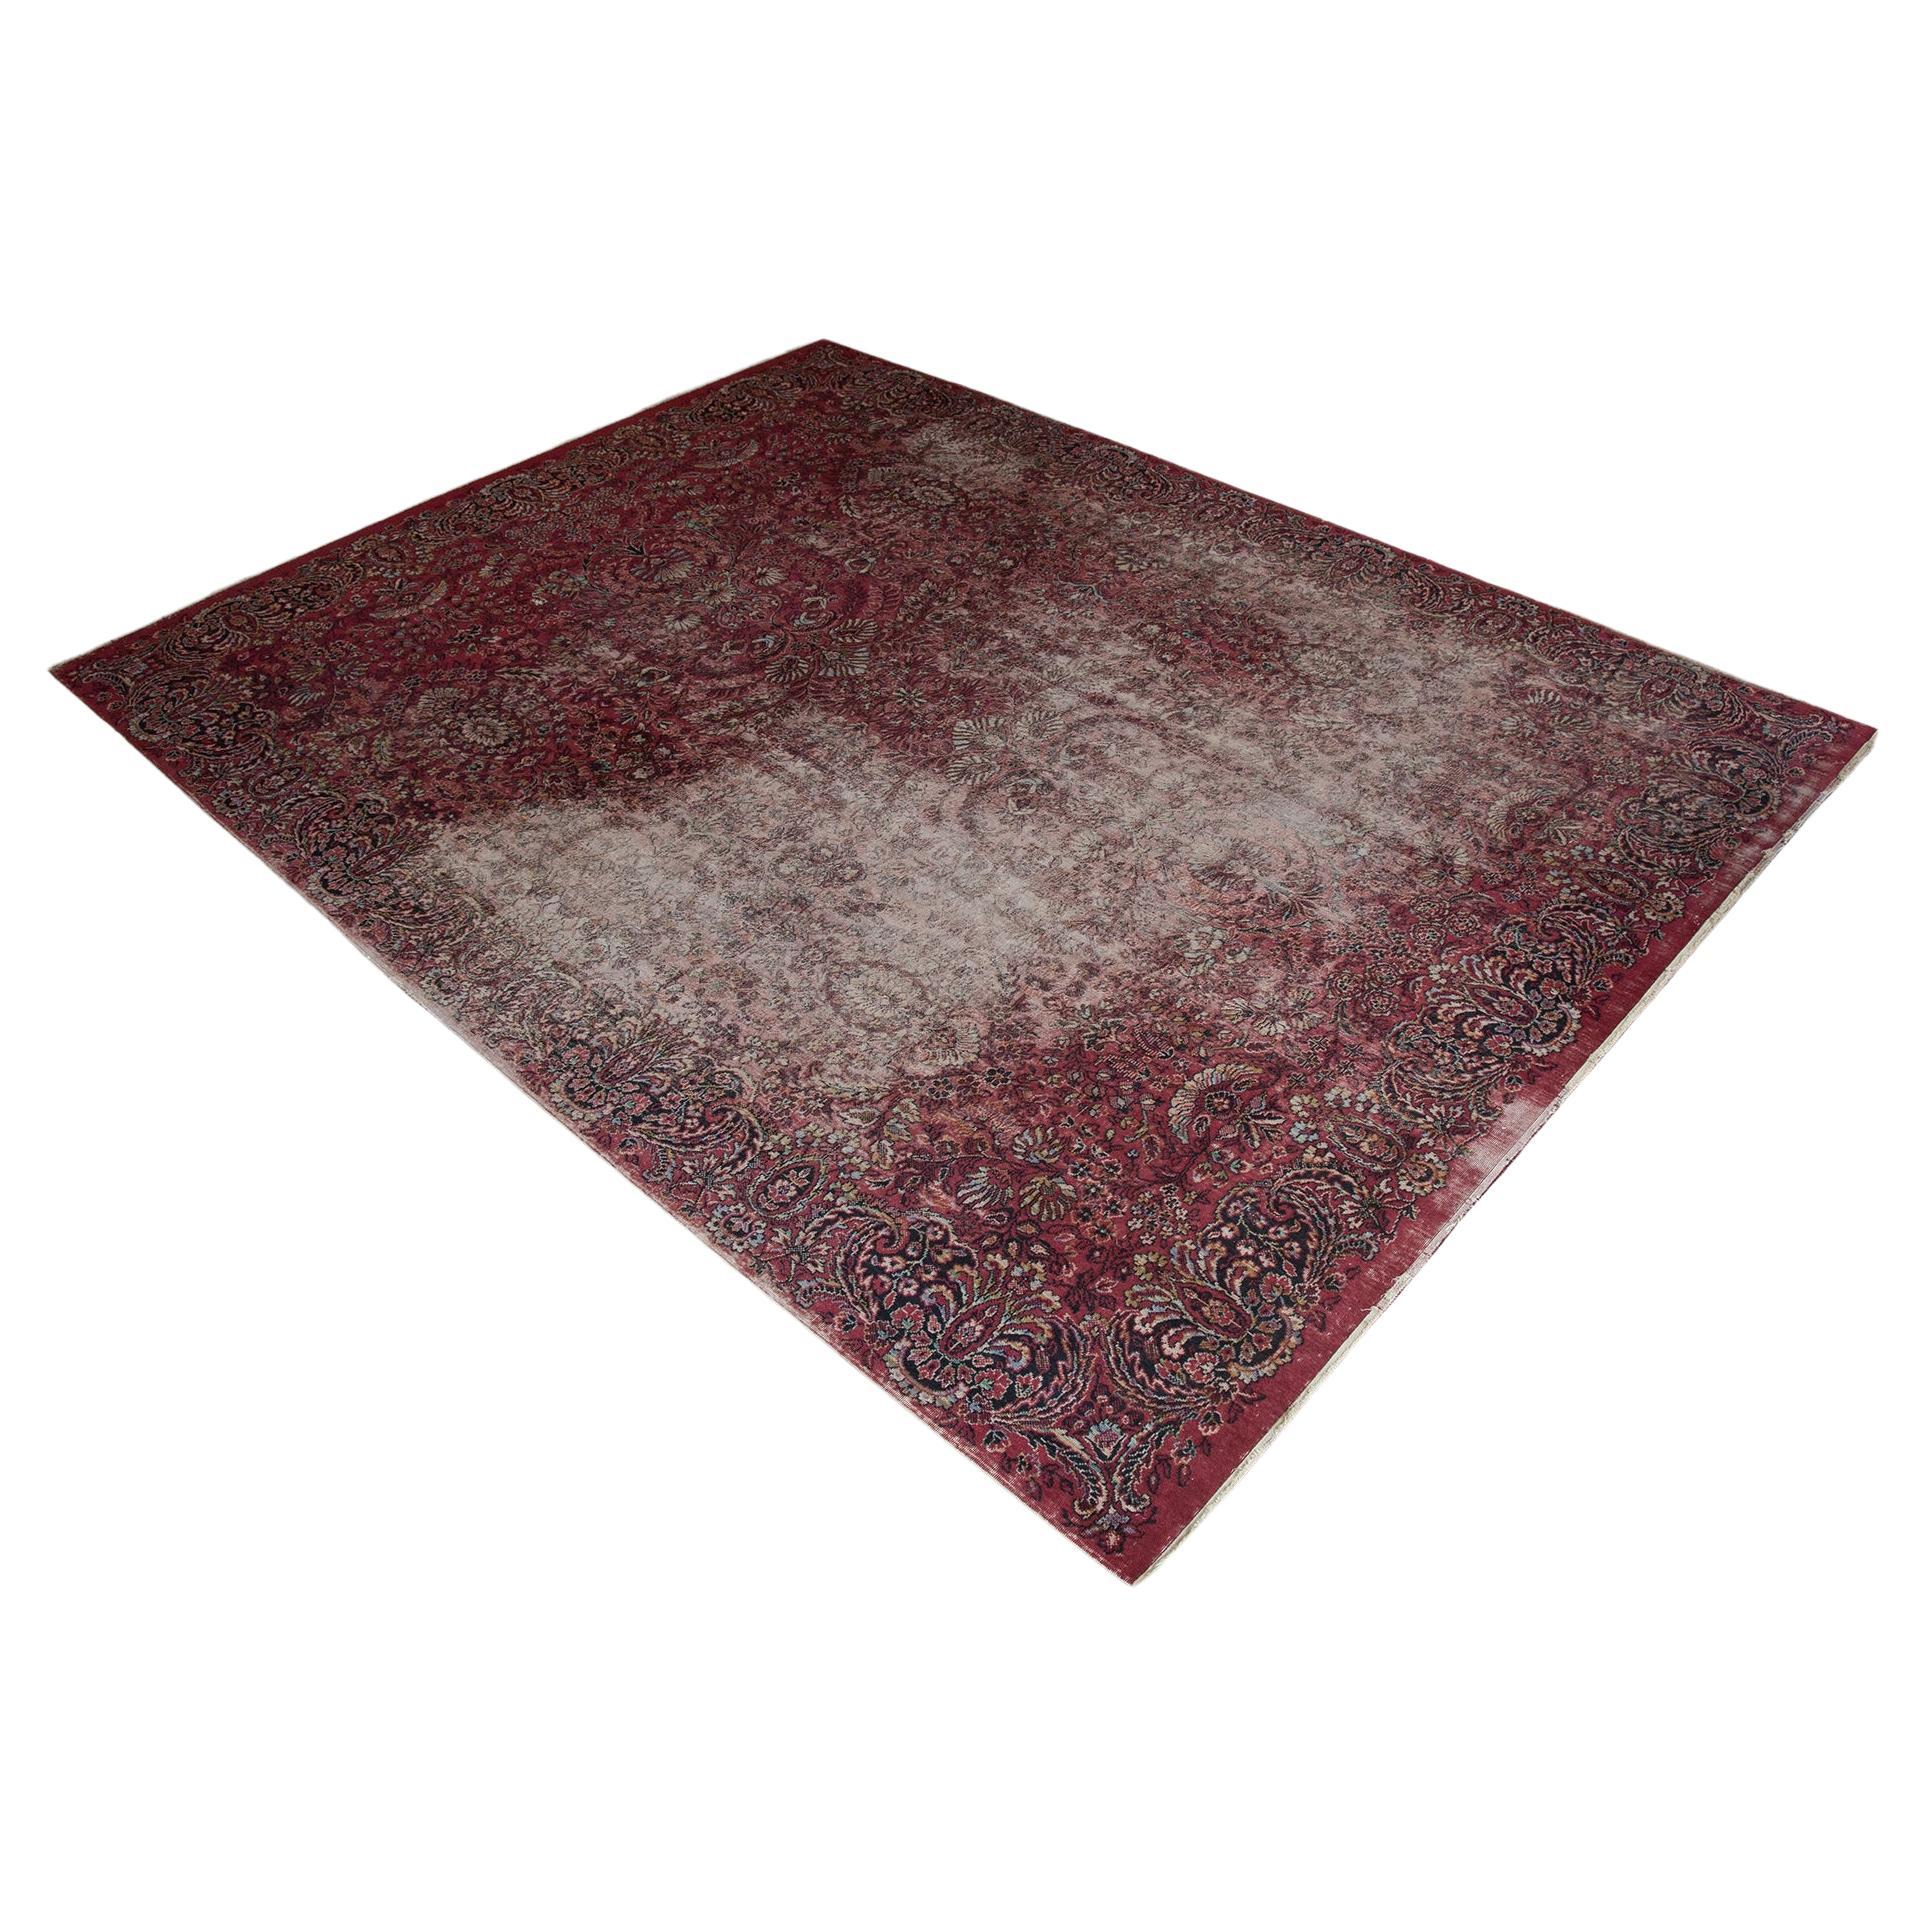 Antique Rug Vegetable Dyed Oriental Persian European Rich Red Nice Aged Wear